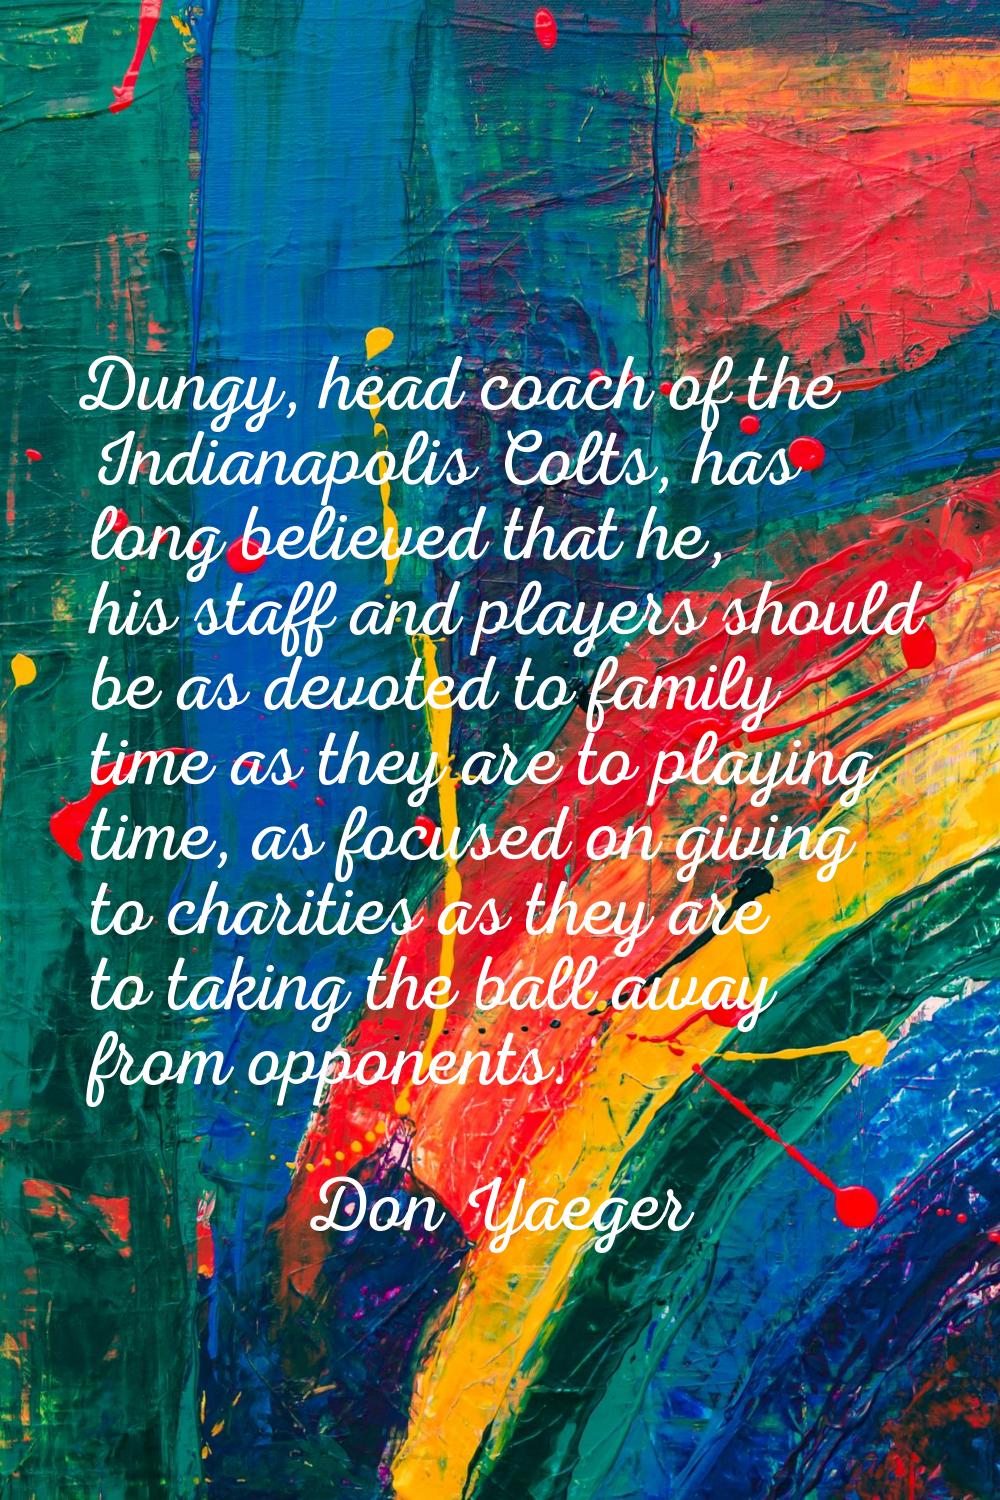 Dungy, head coach of the Indianapolis Colts, has long believed that he, his staff and players shoul